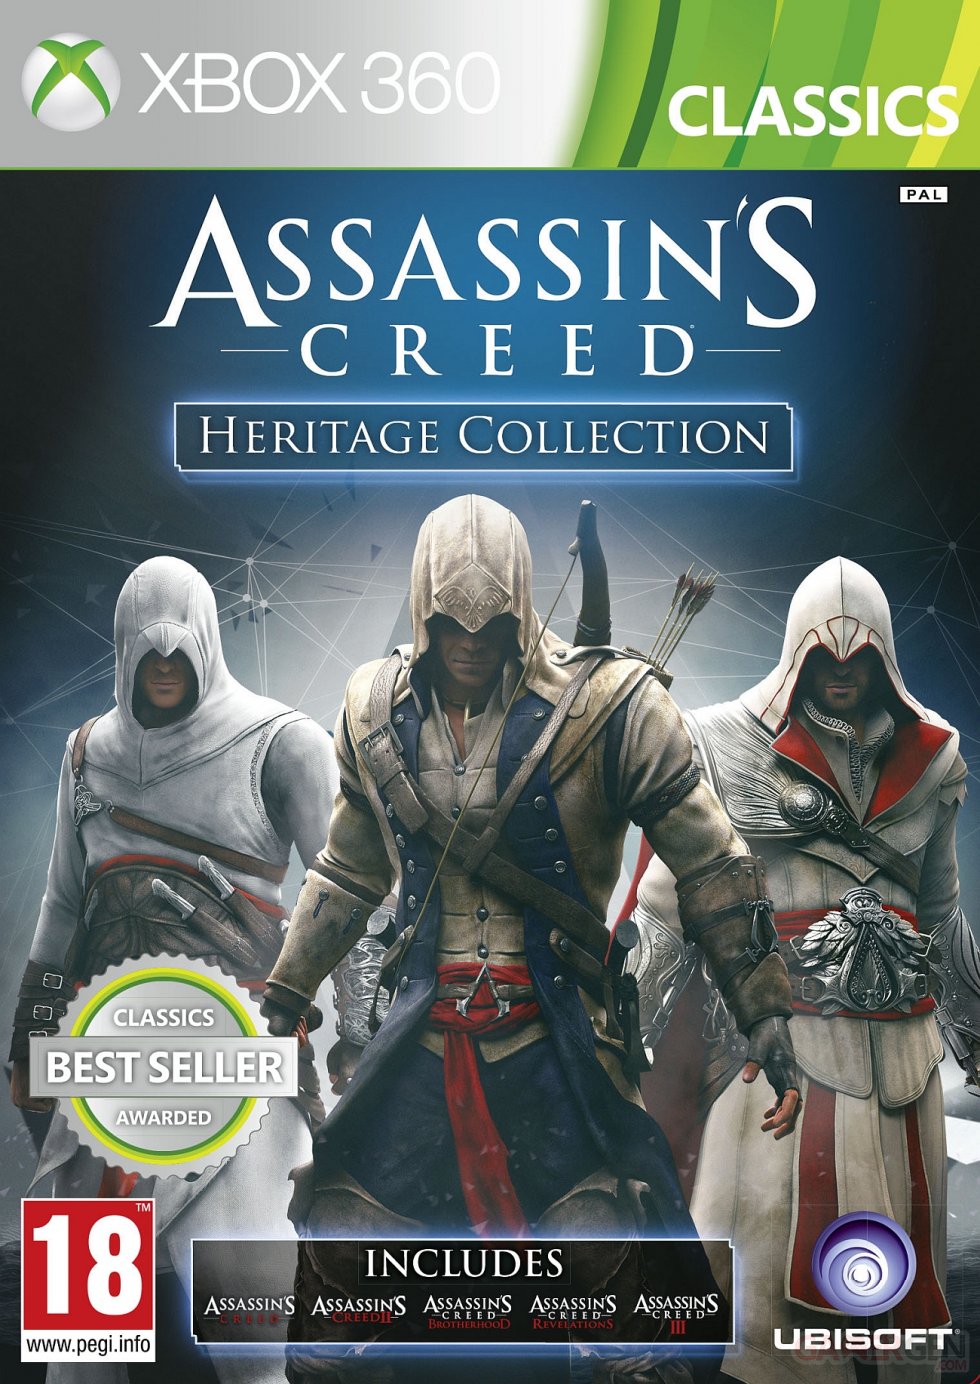 Assassin's Creed Heritage Collection screenshot 04102013 001